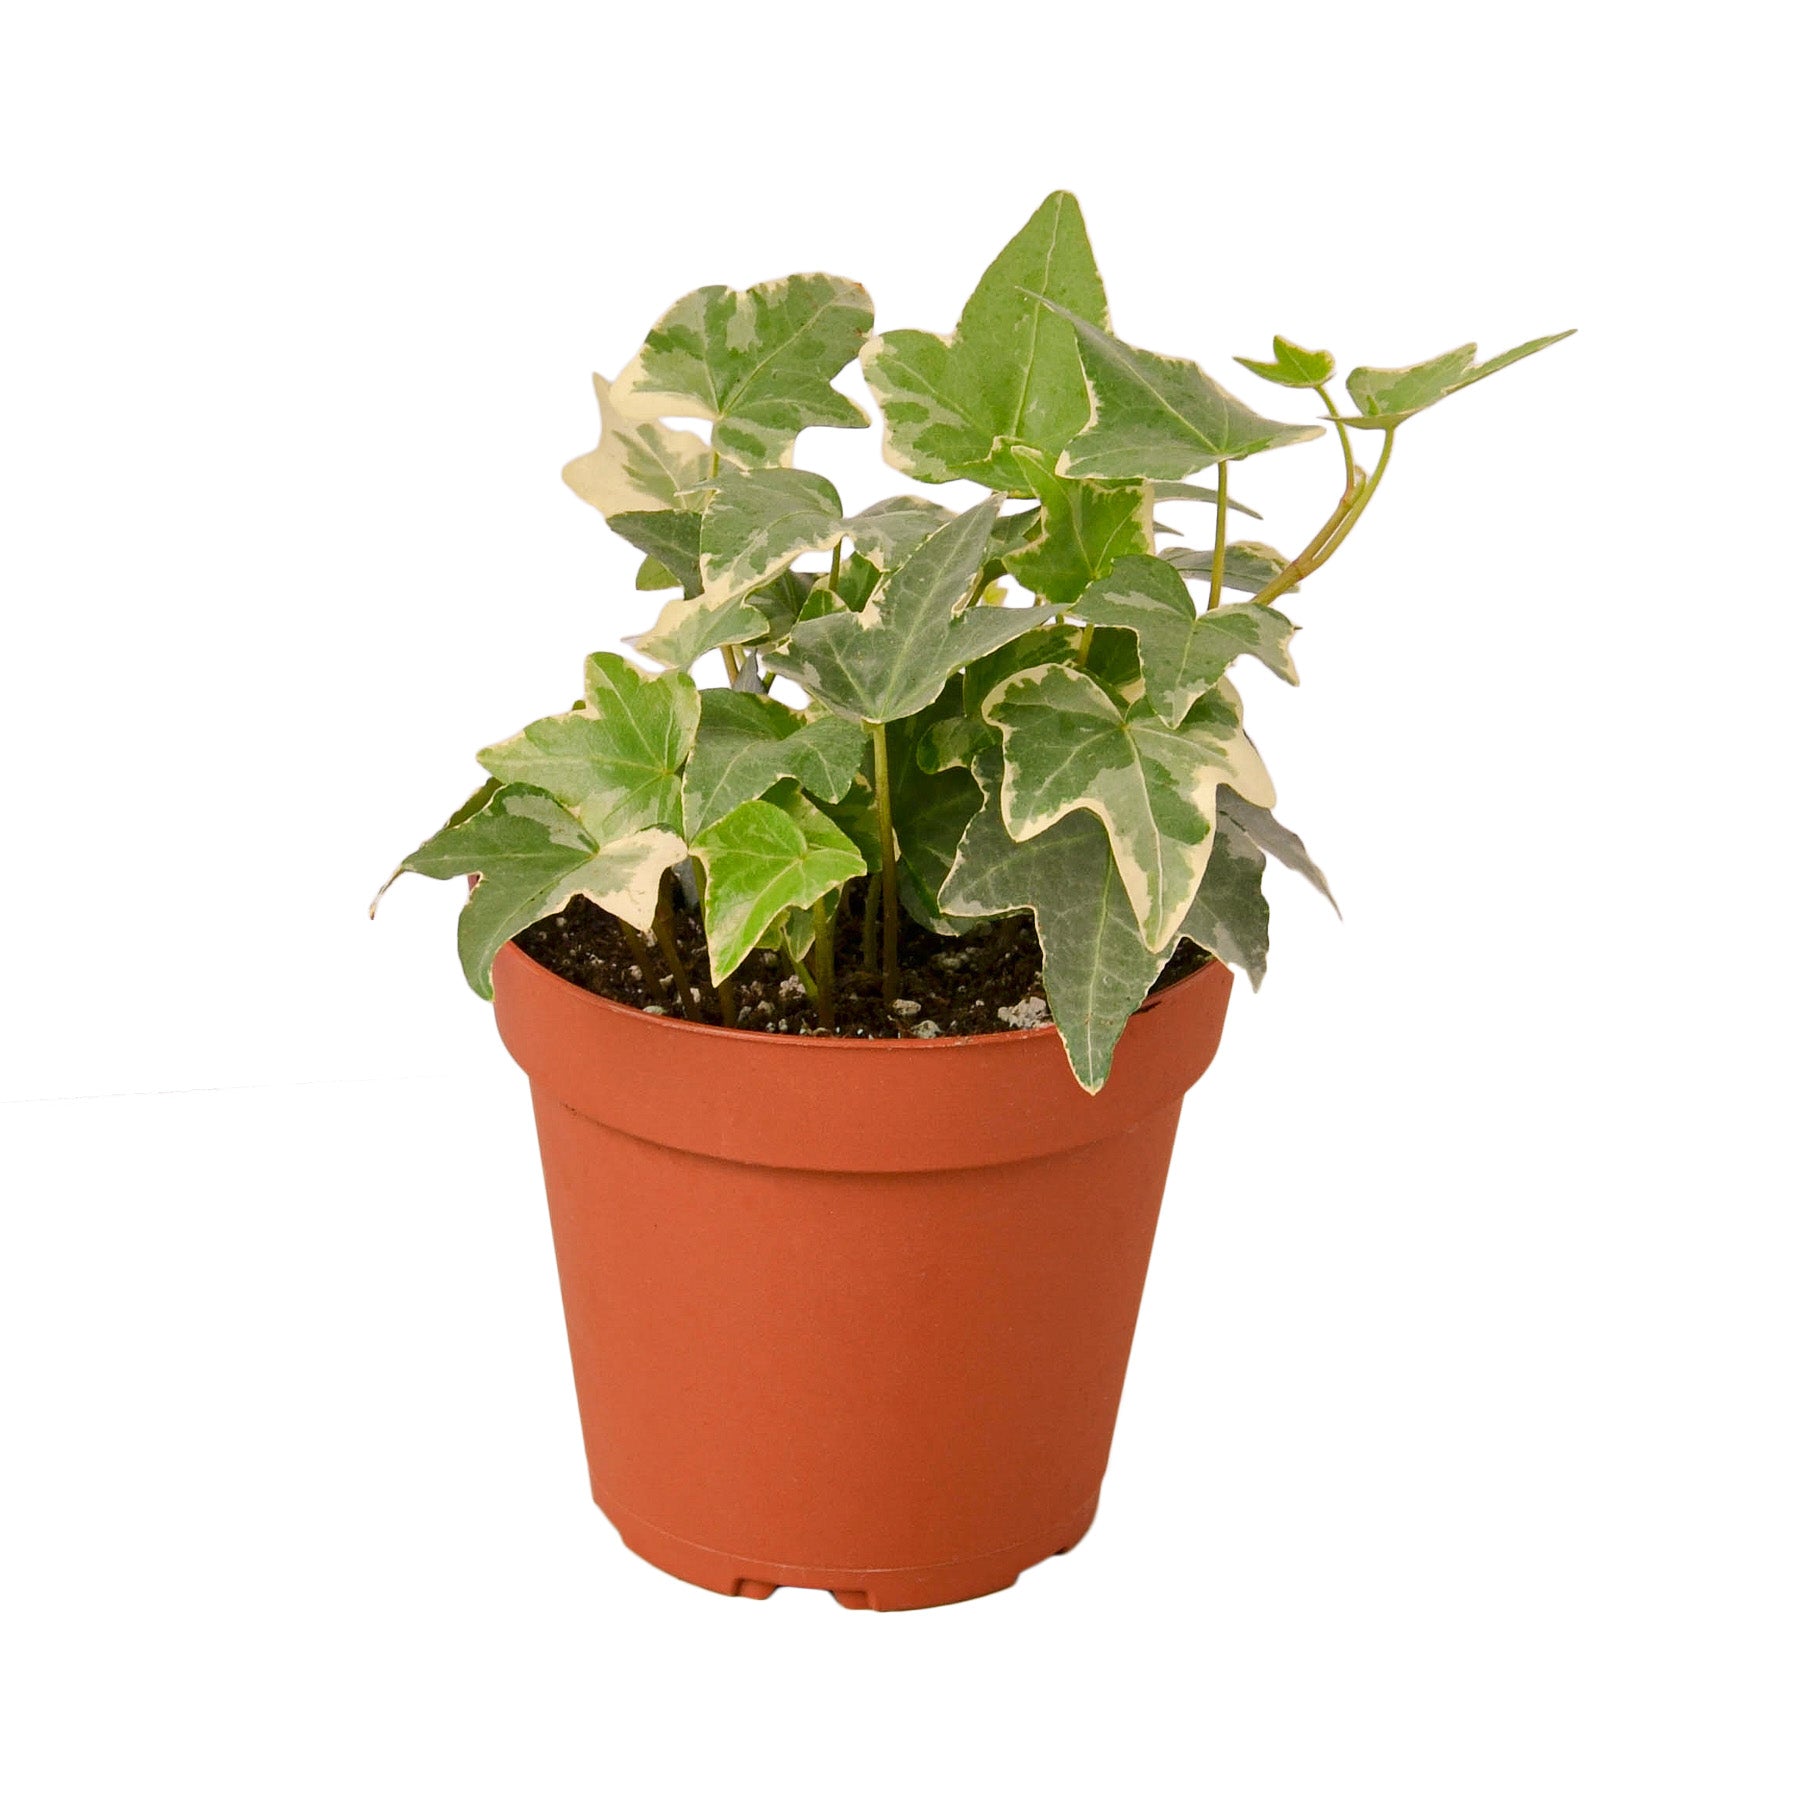 An ivy plant in a pot.